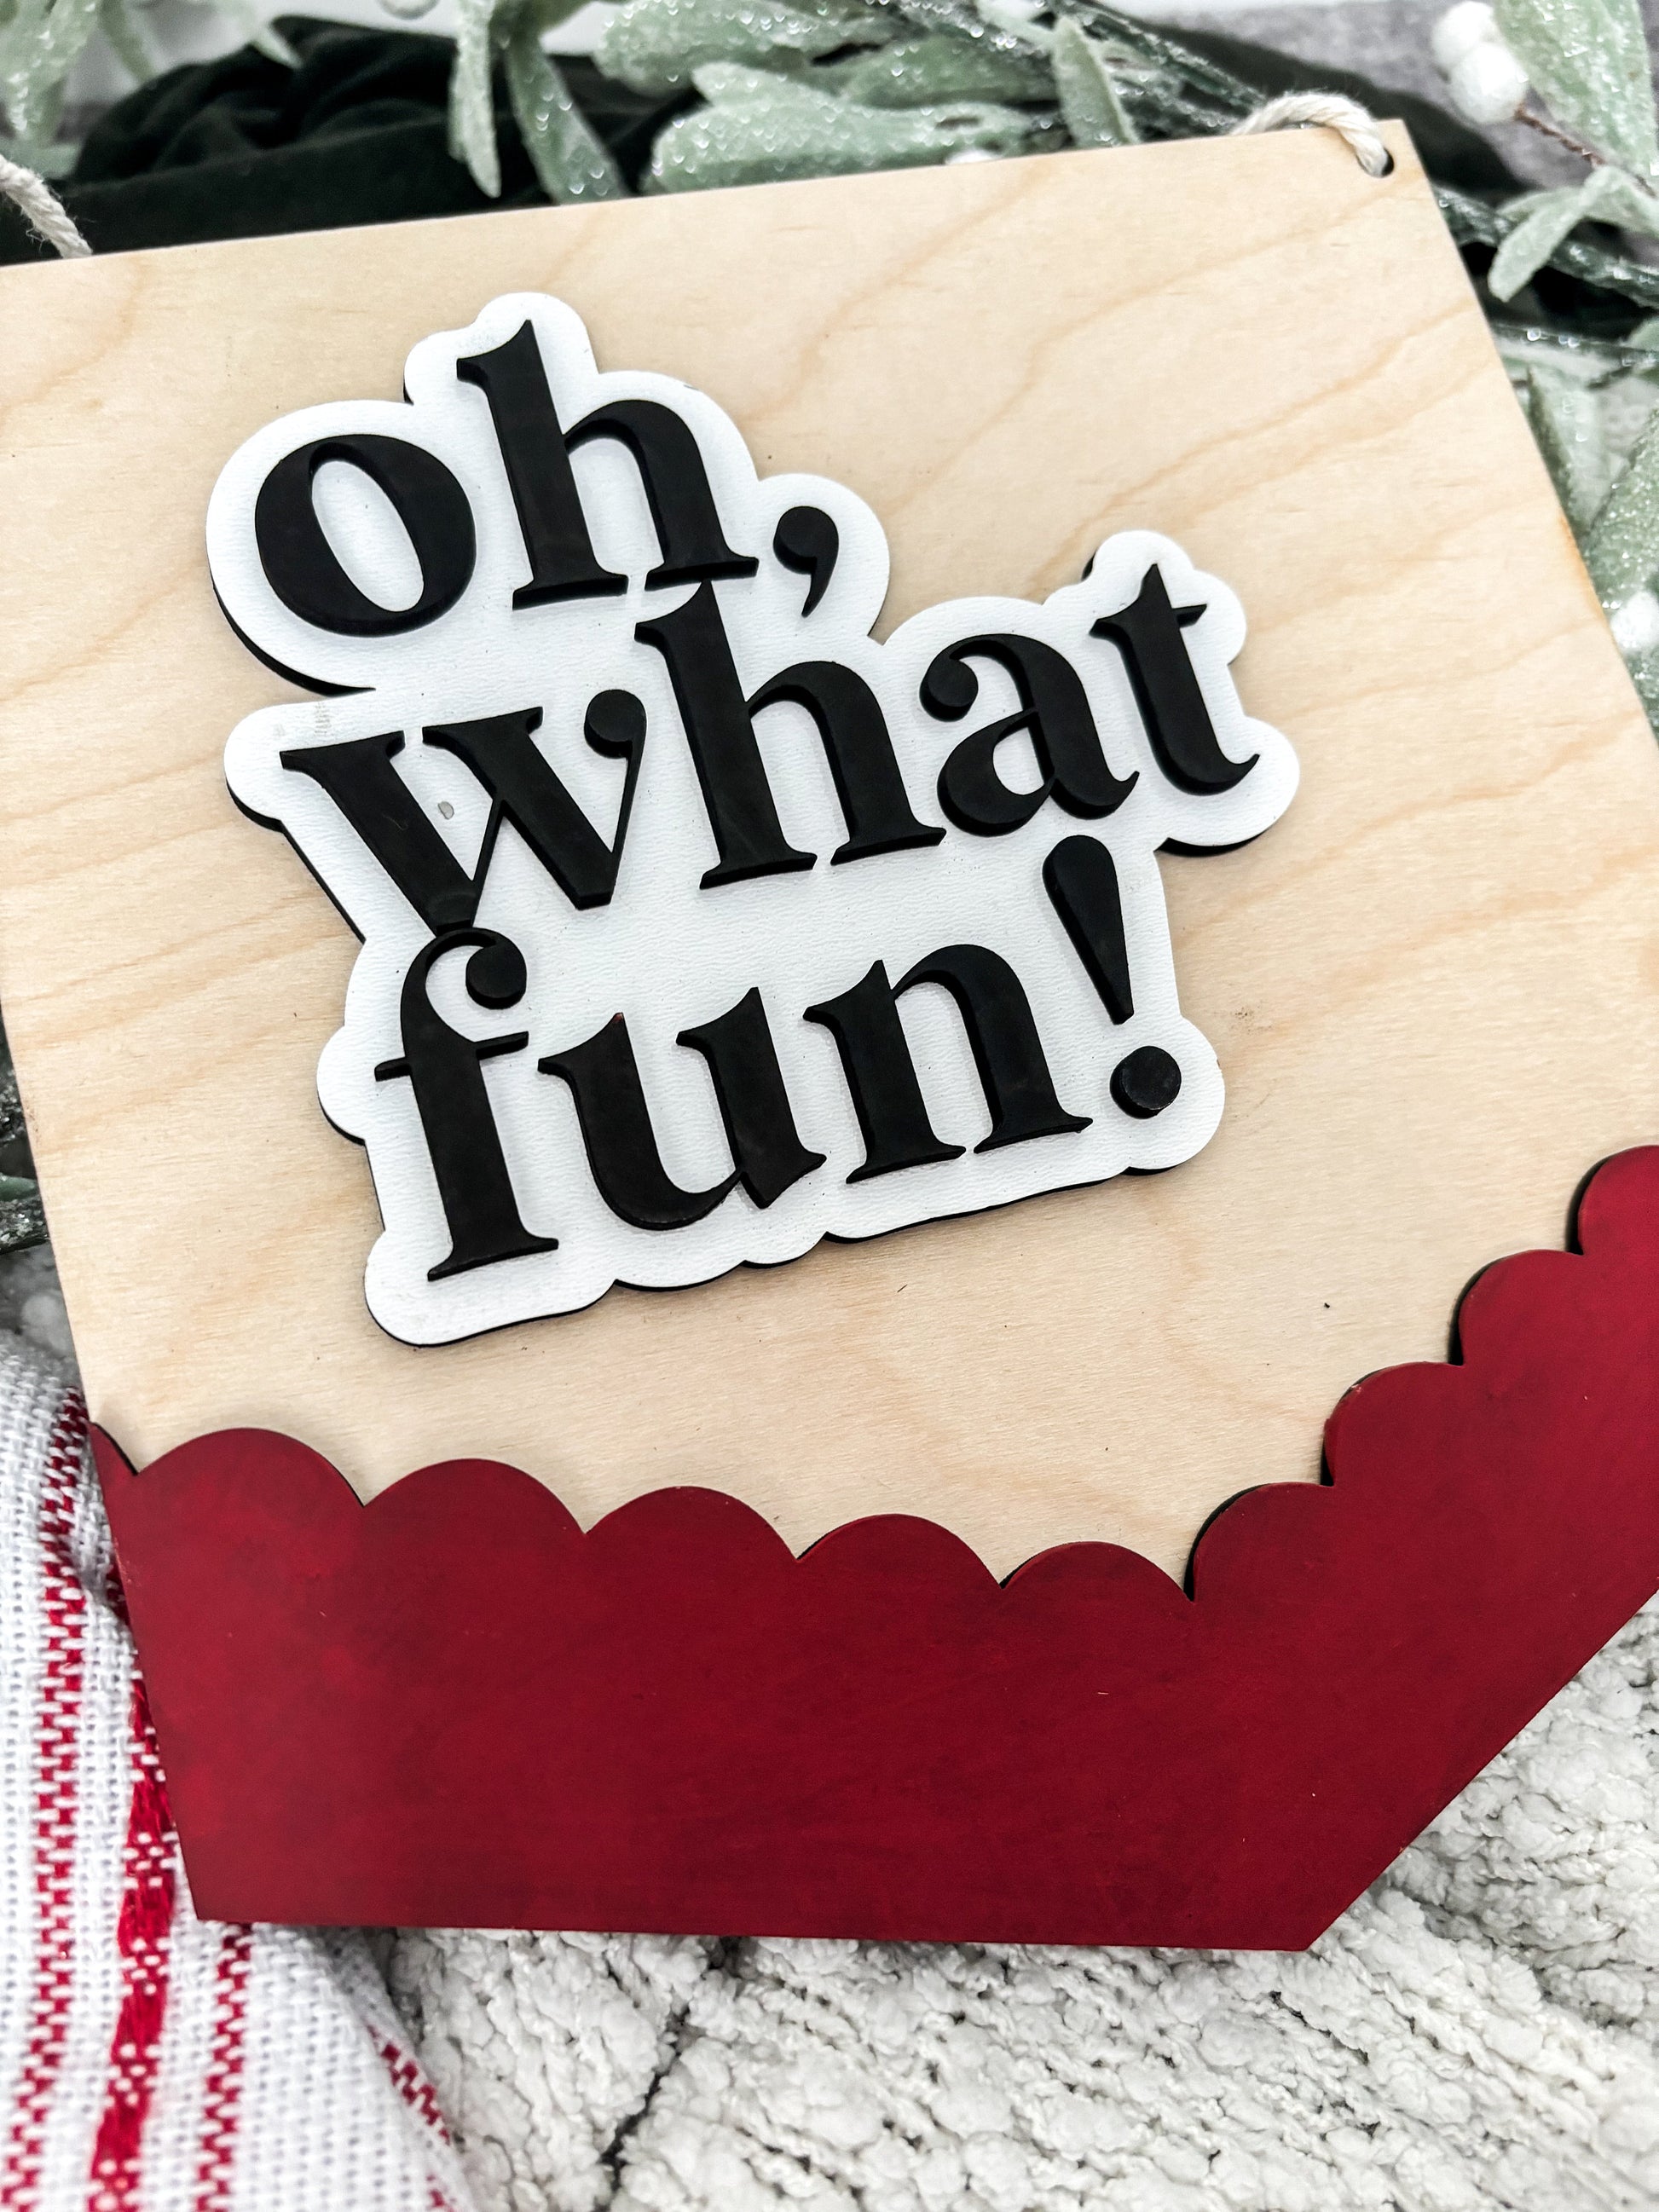 Oh What Fun Sign, Oh What Fun, Board, Christmas Hanging Decor, Christmas wall decor, Modern Christmas Decorations